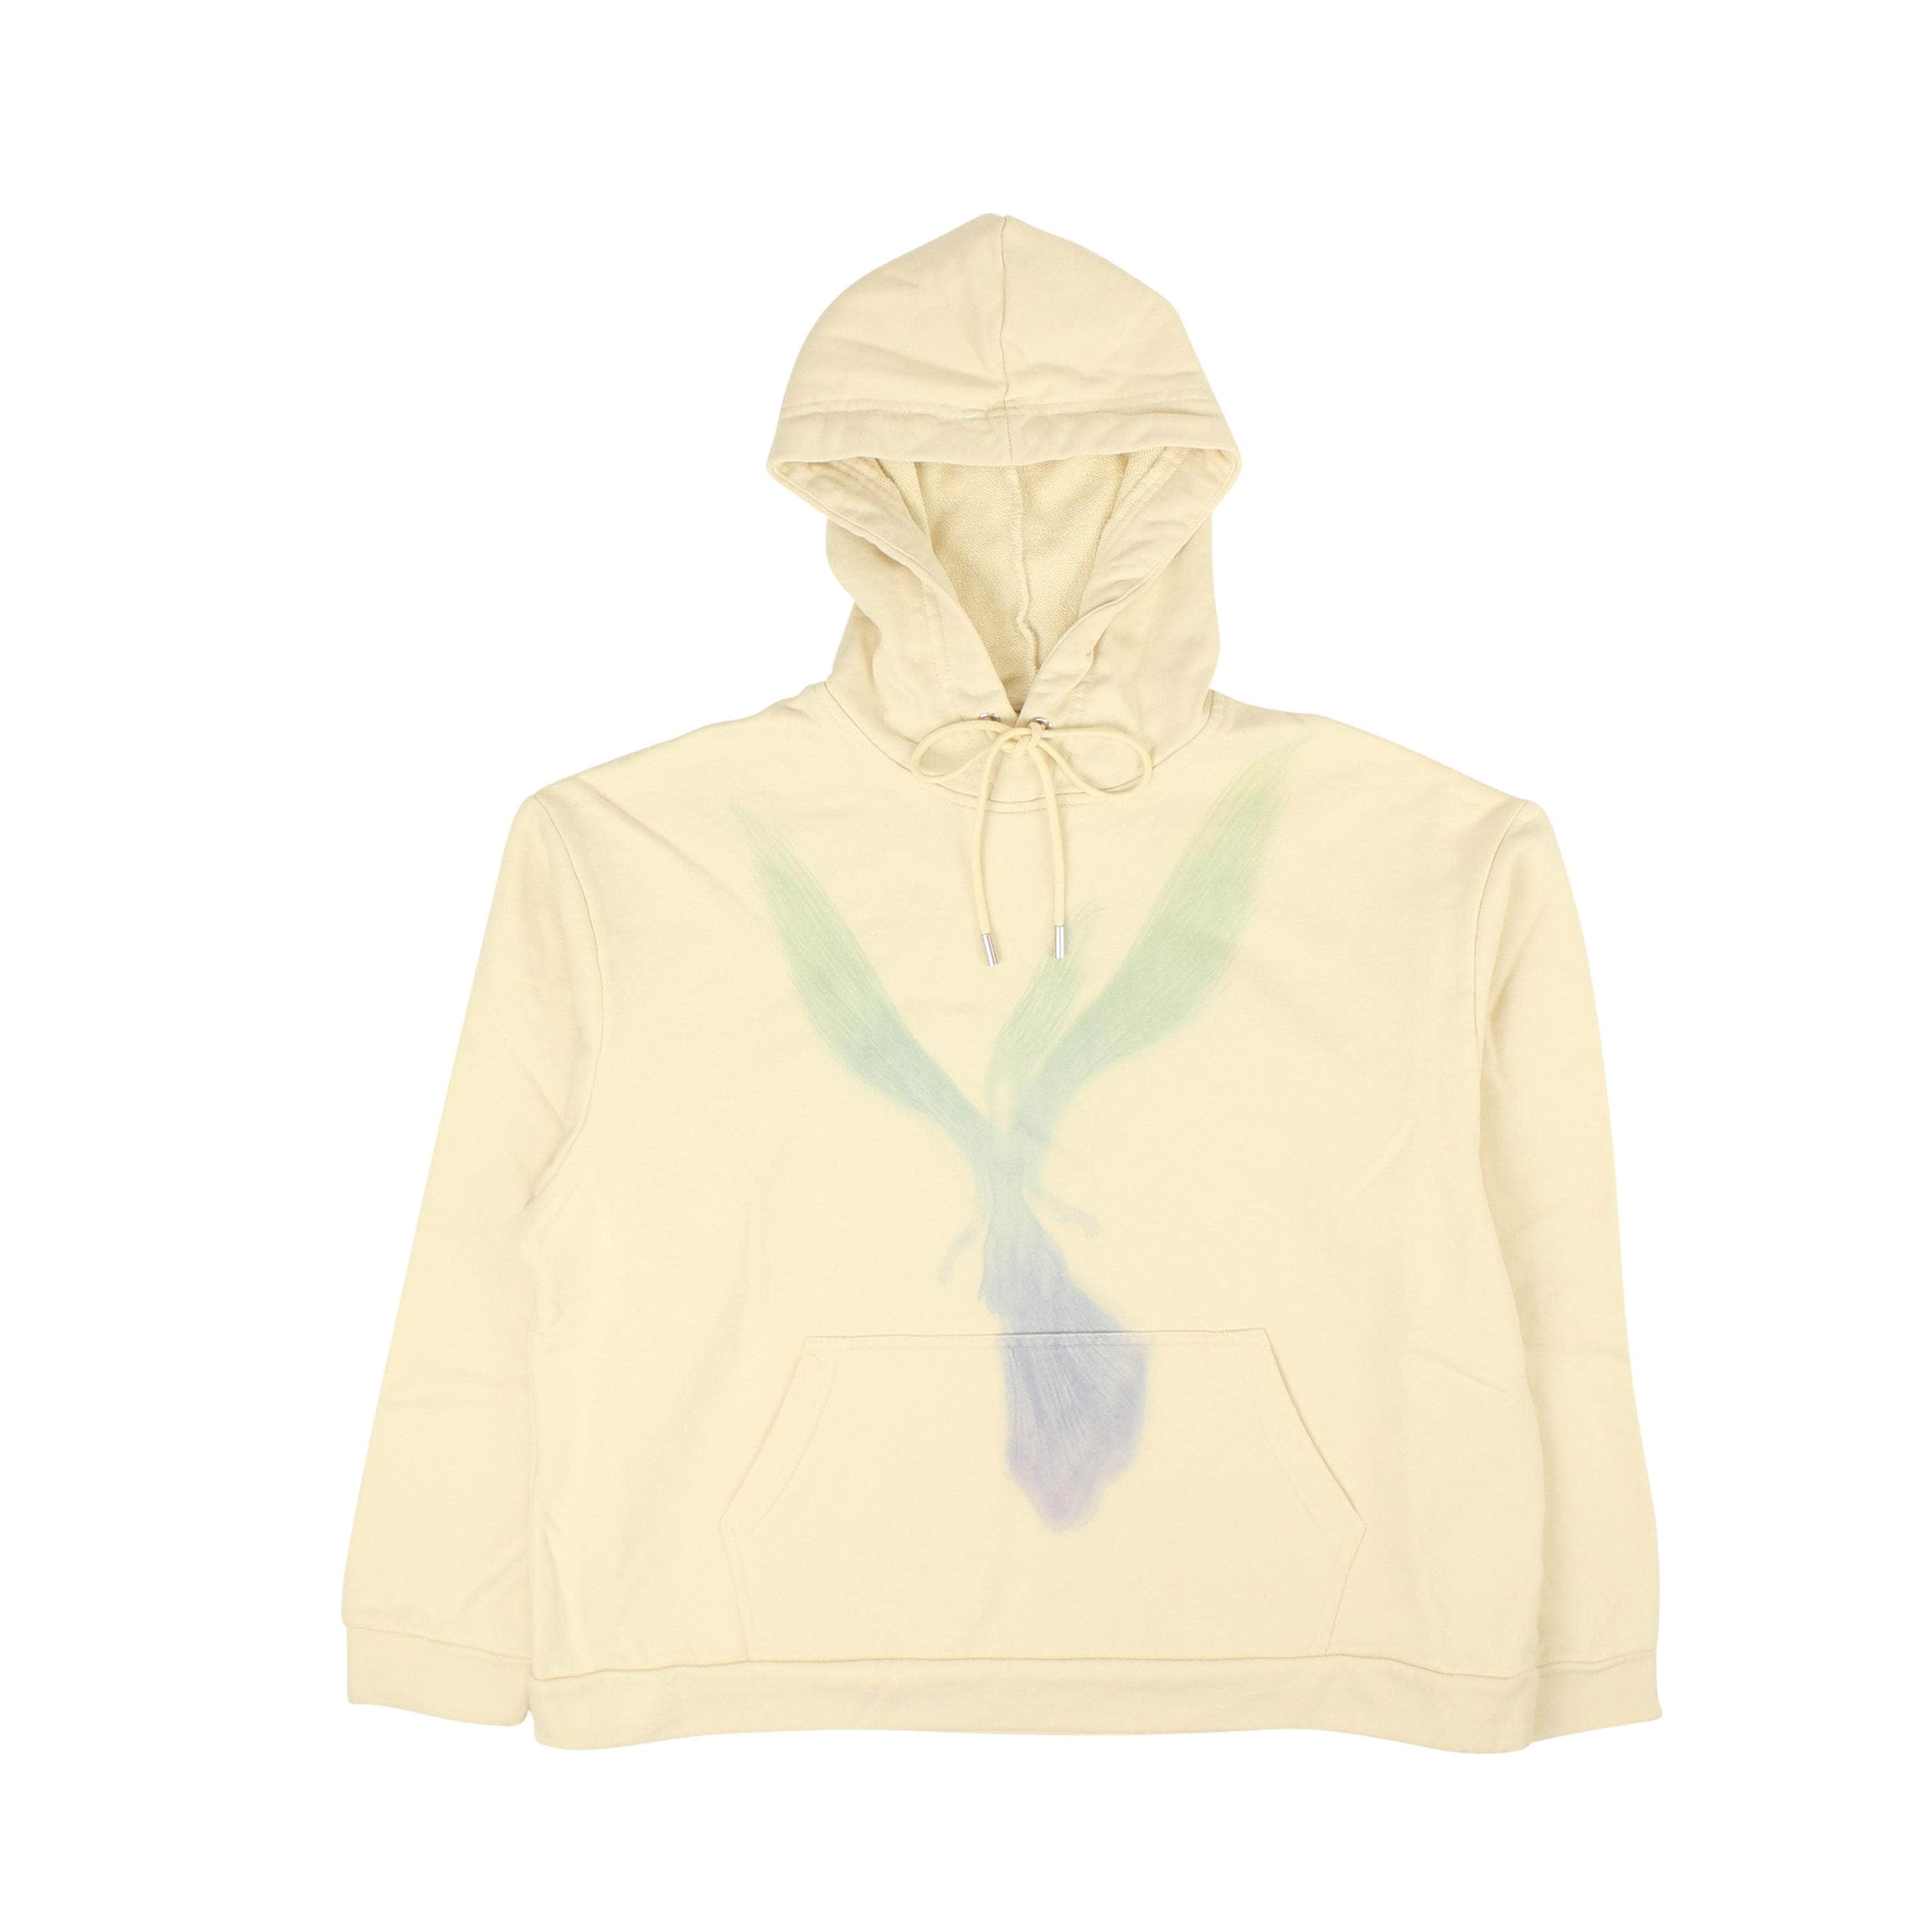 Who Decides War 250-500, channelenable-all, chicmi, couponcollection, main-clothing, shop375, who-decides-war off-White Guardian Hooded Pullover